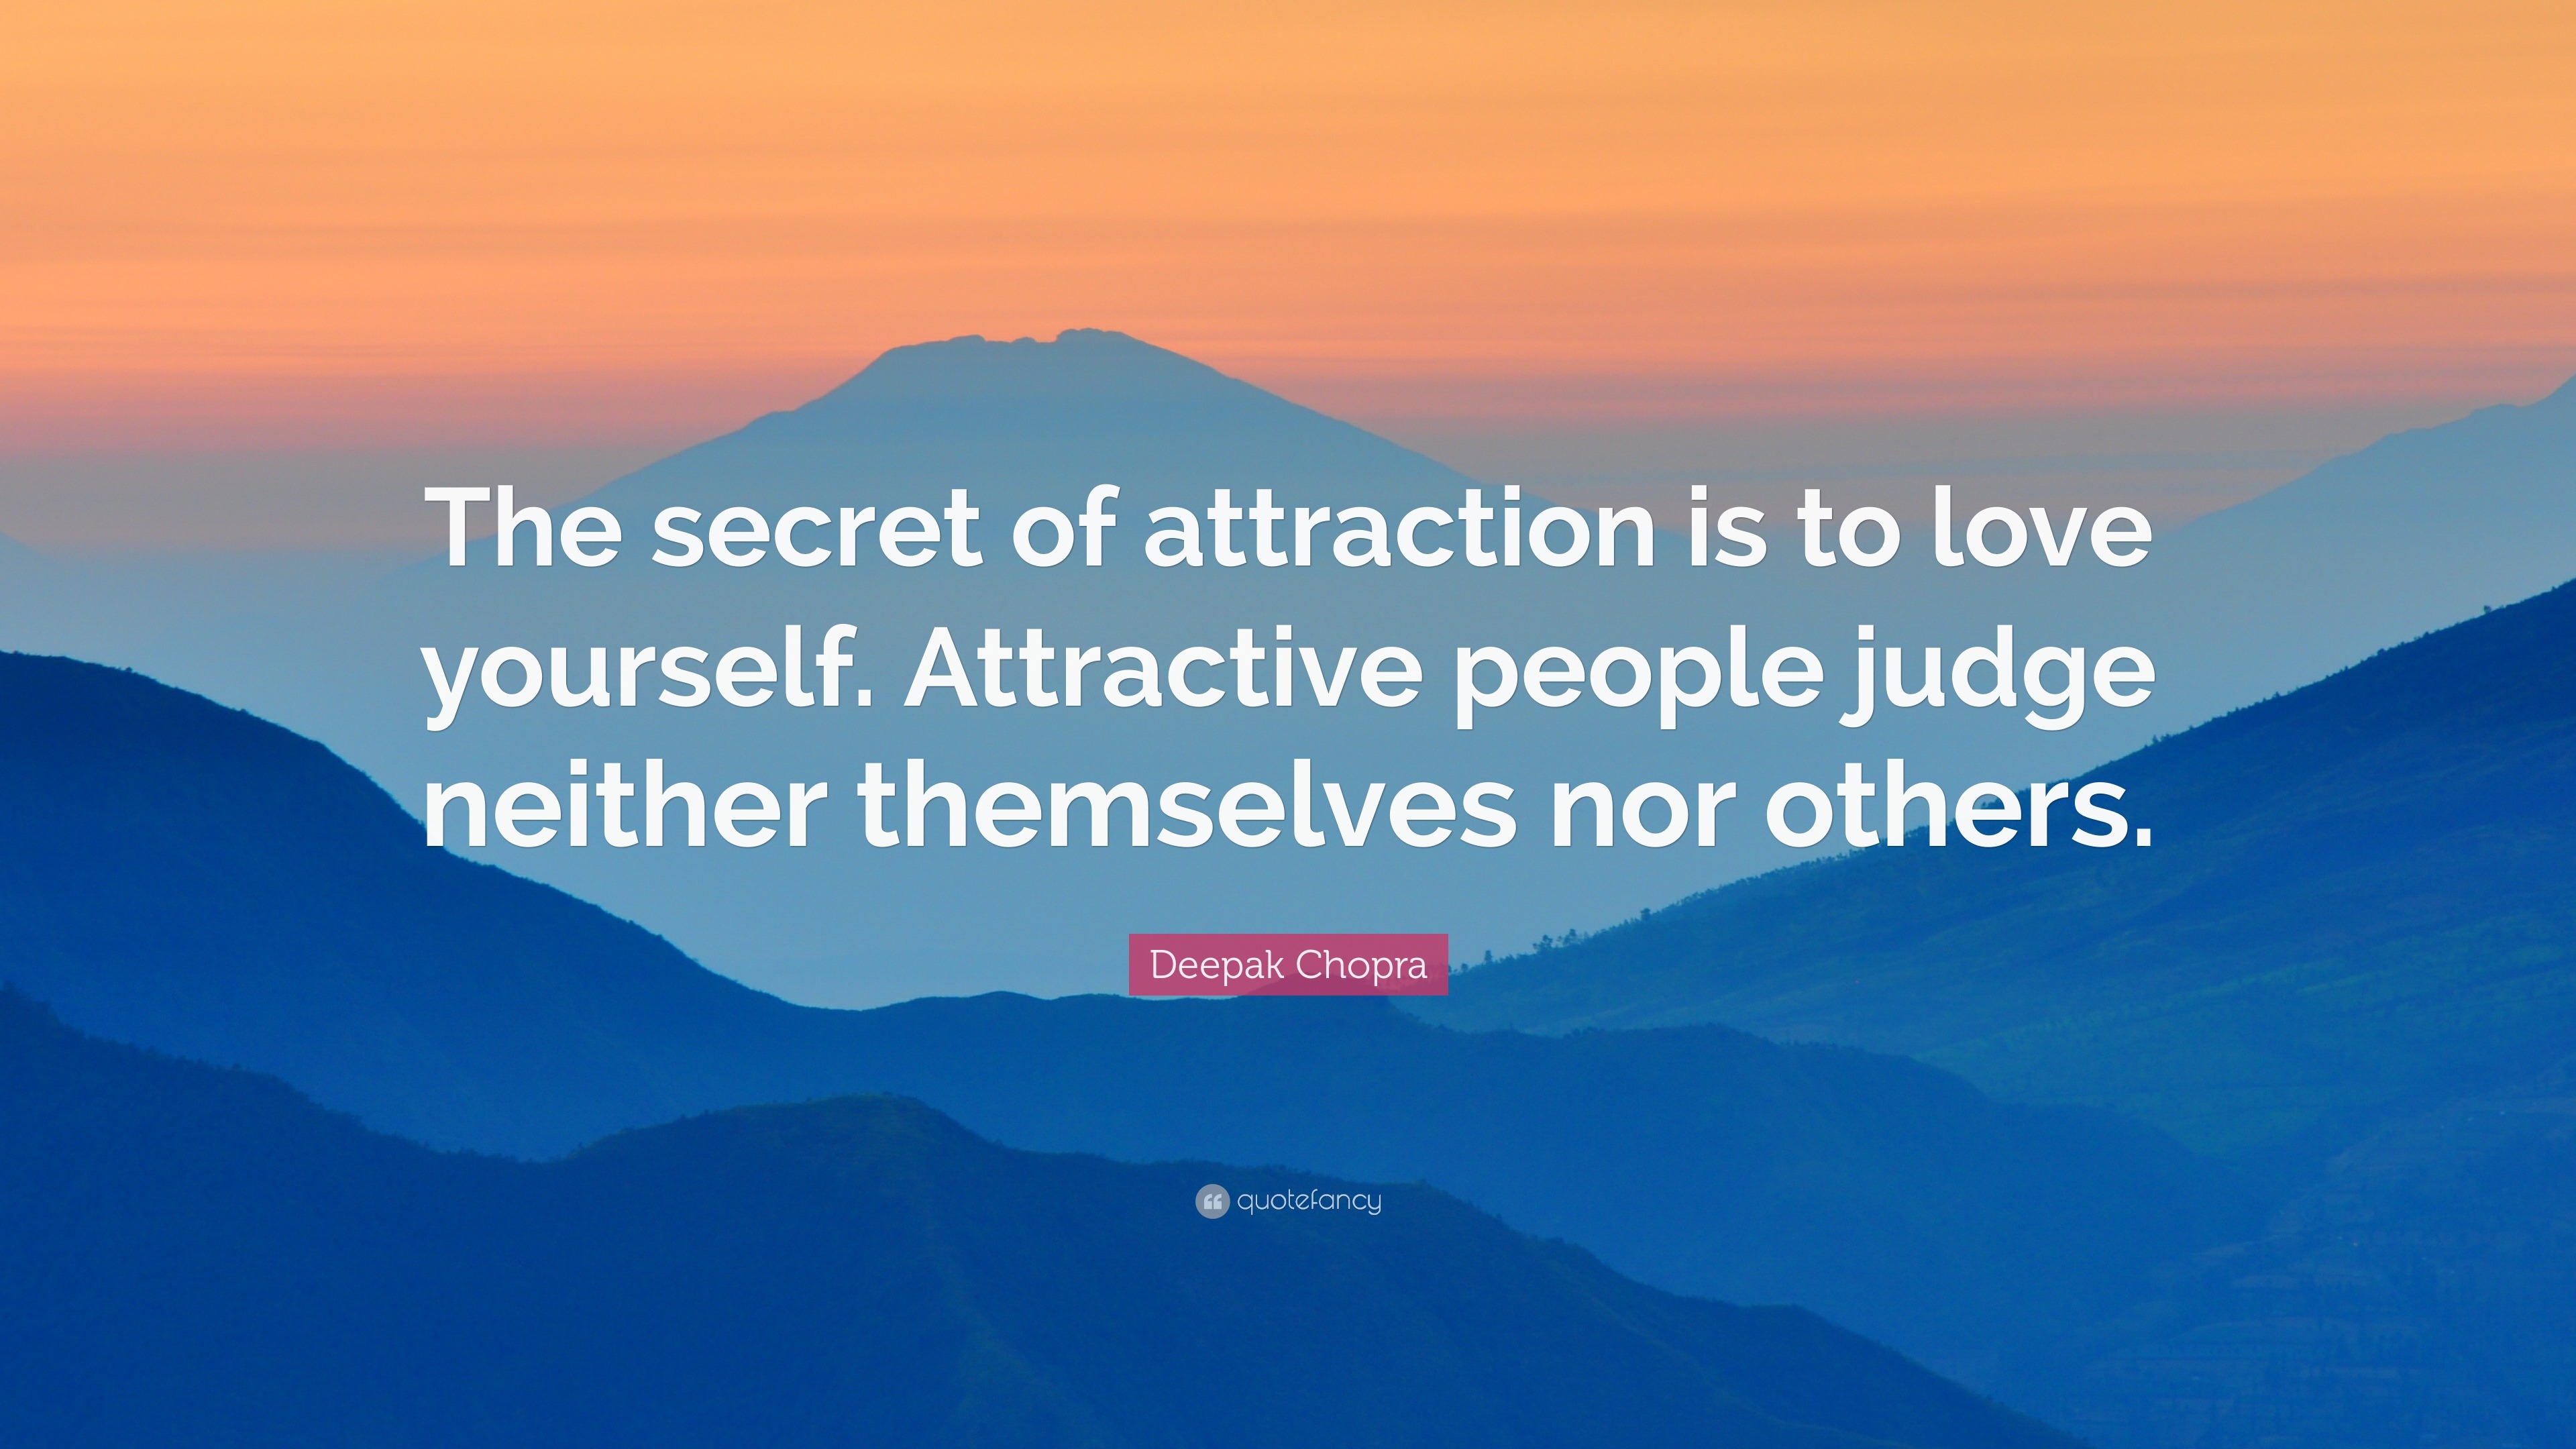 The secret of attraction is to love yourself. 